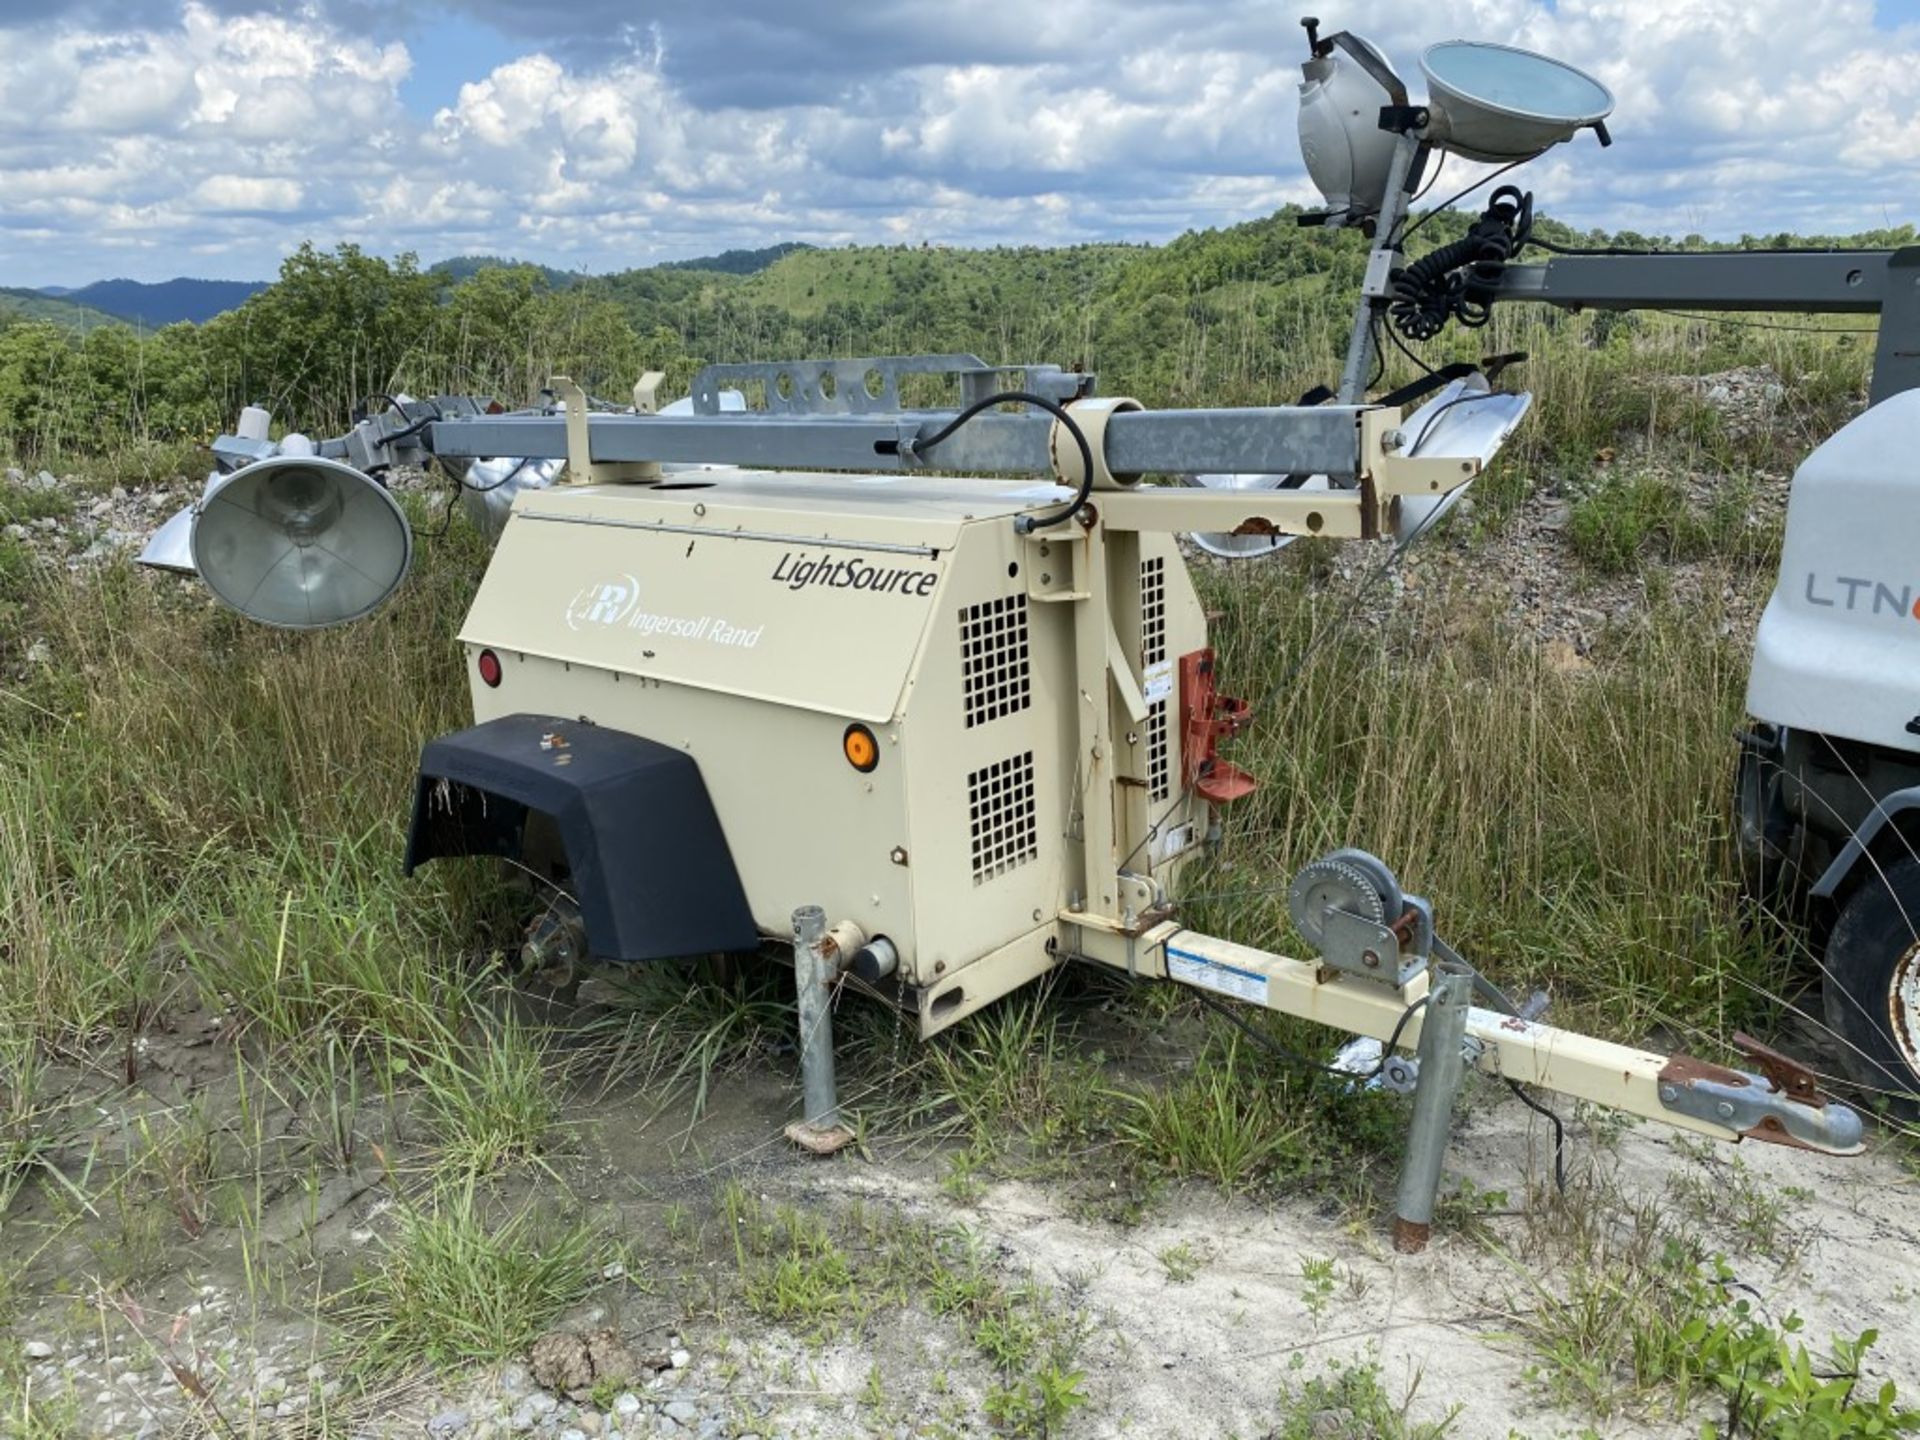 (2) TOWABLE LIGHT TOWERS FOR PARTS/REPAIR, WACKER NEUSON LTN 6, 18,833 HOURS SHOWING, 3-CYLINDER - Image 8 of 11